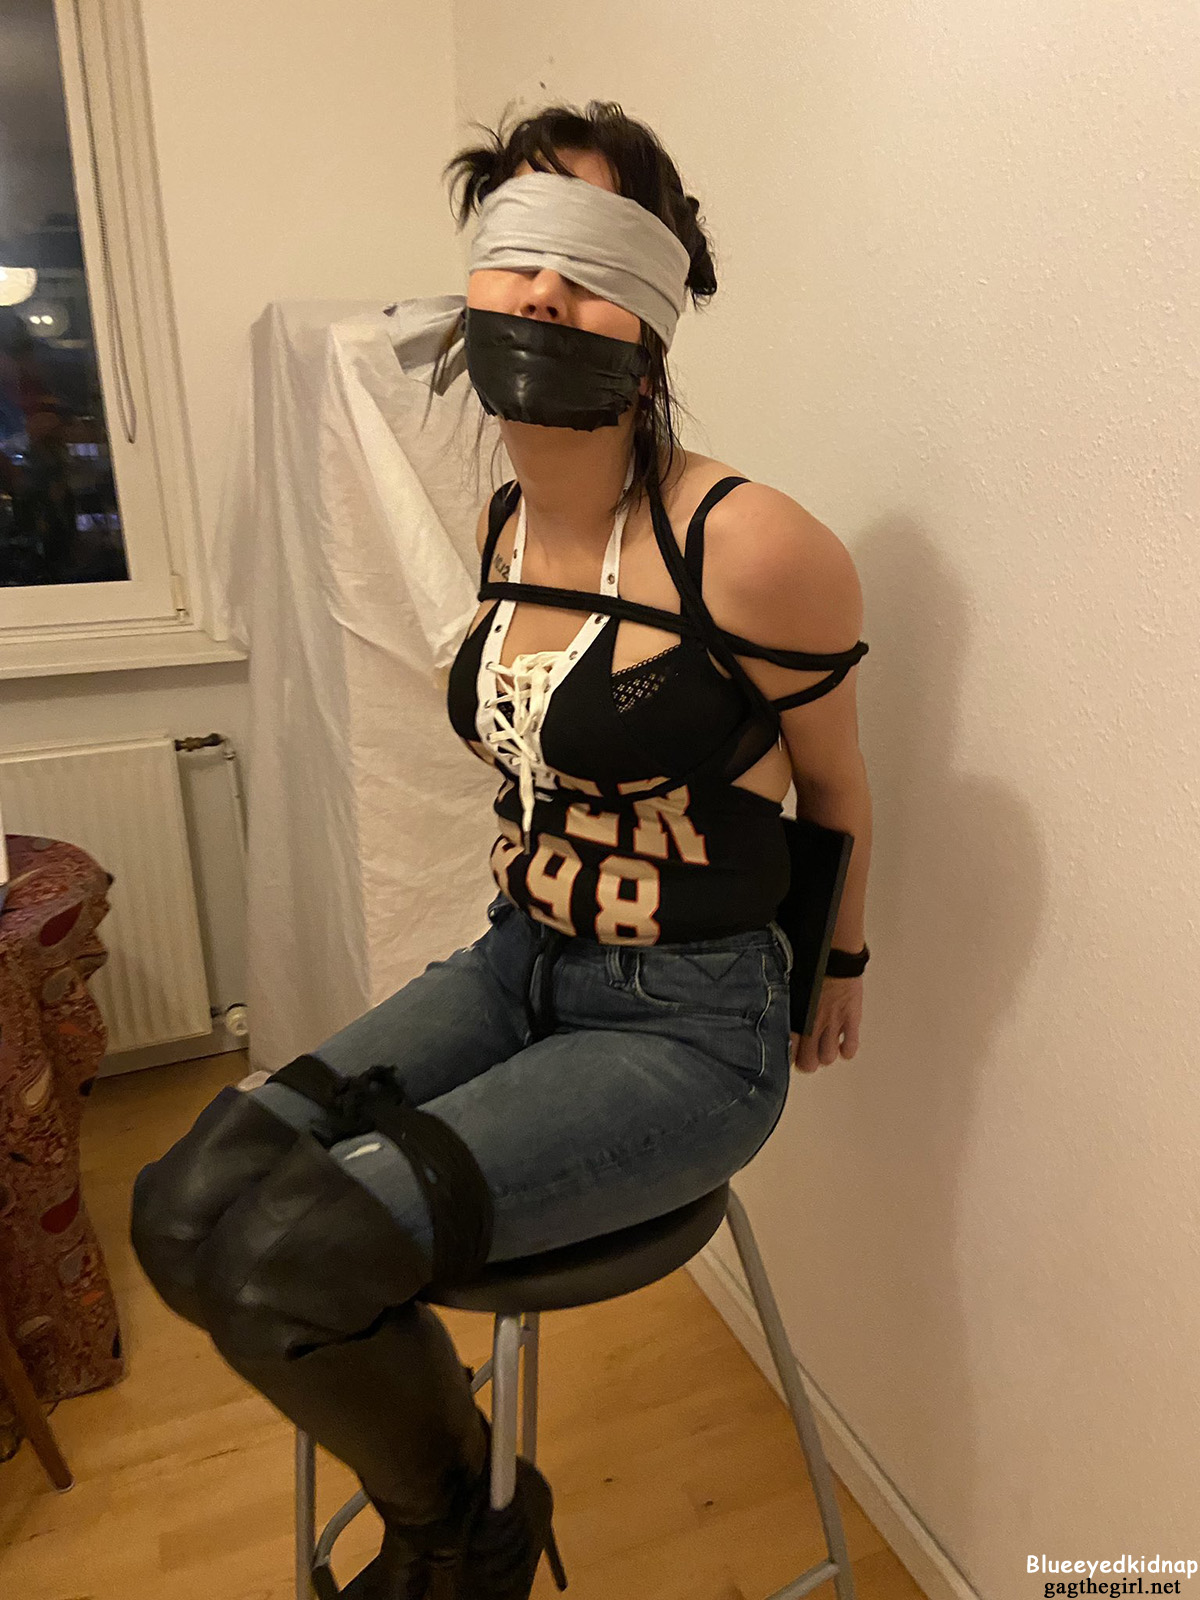 bill dyche share tied up tape gagged photos